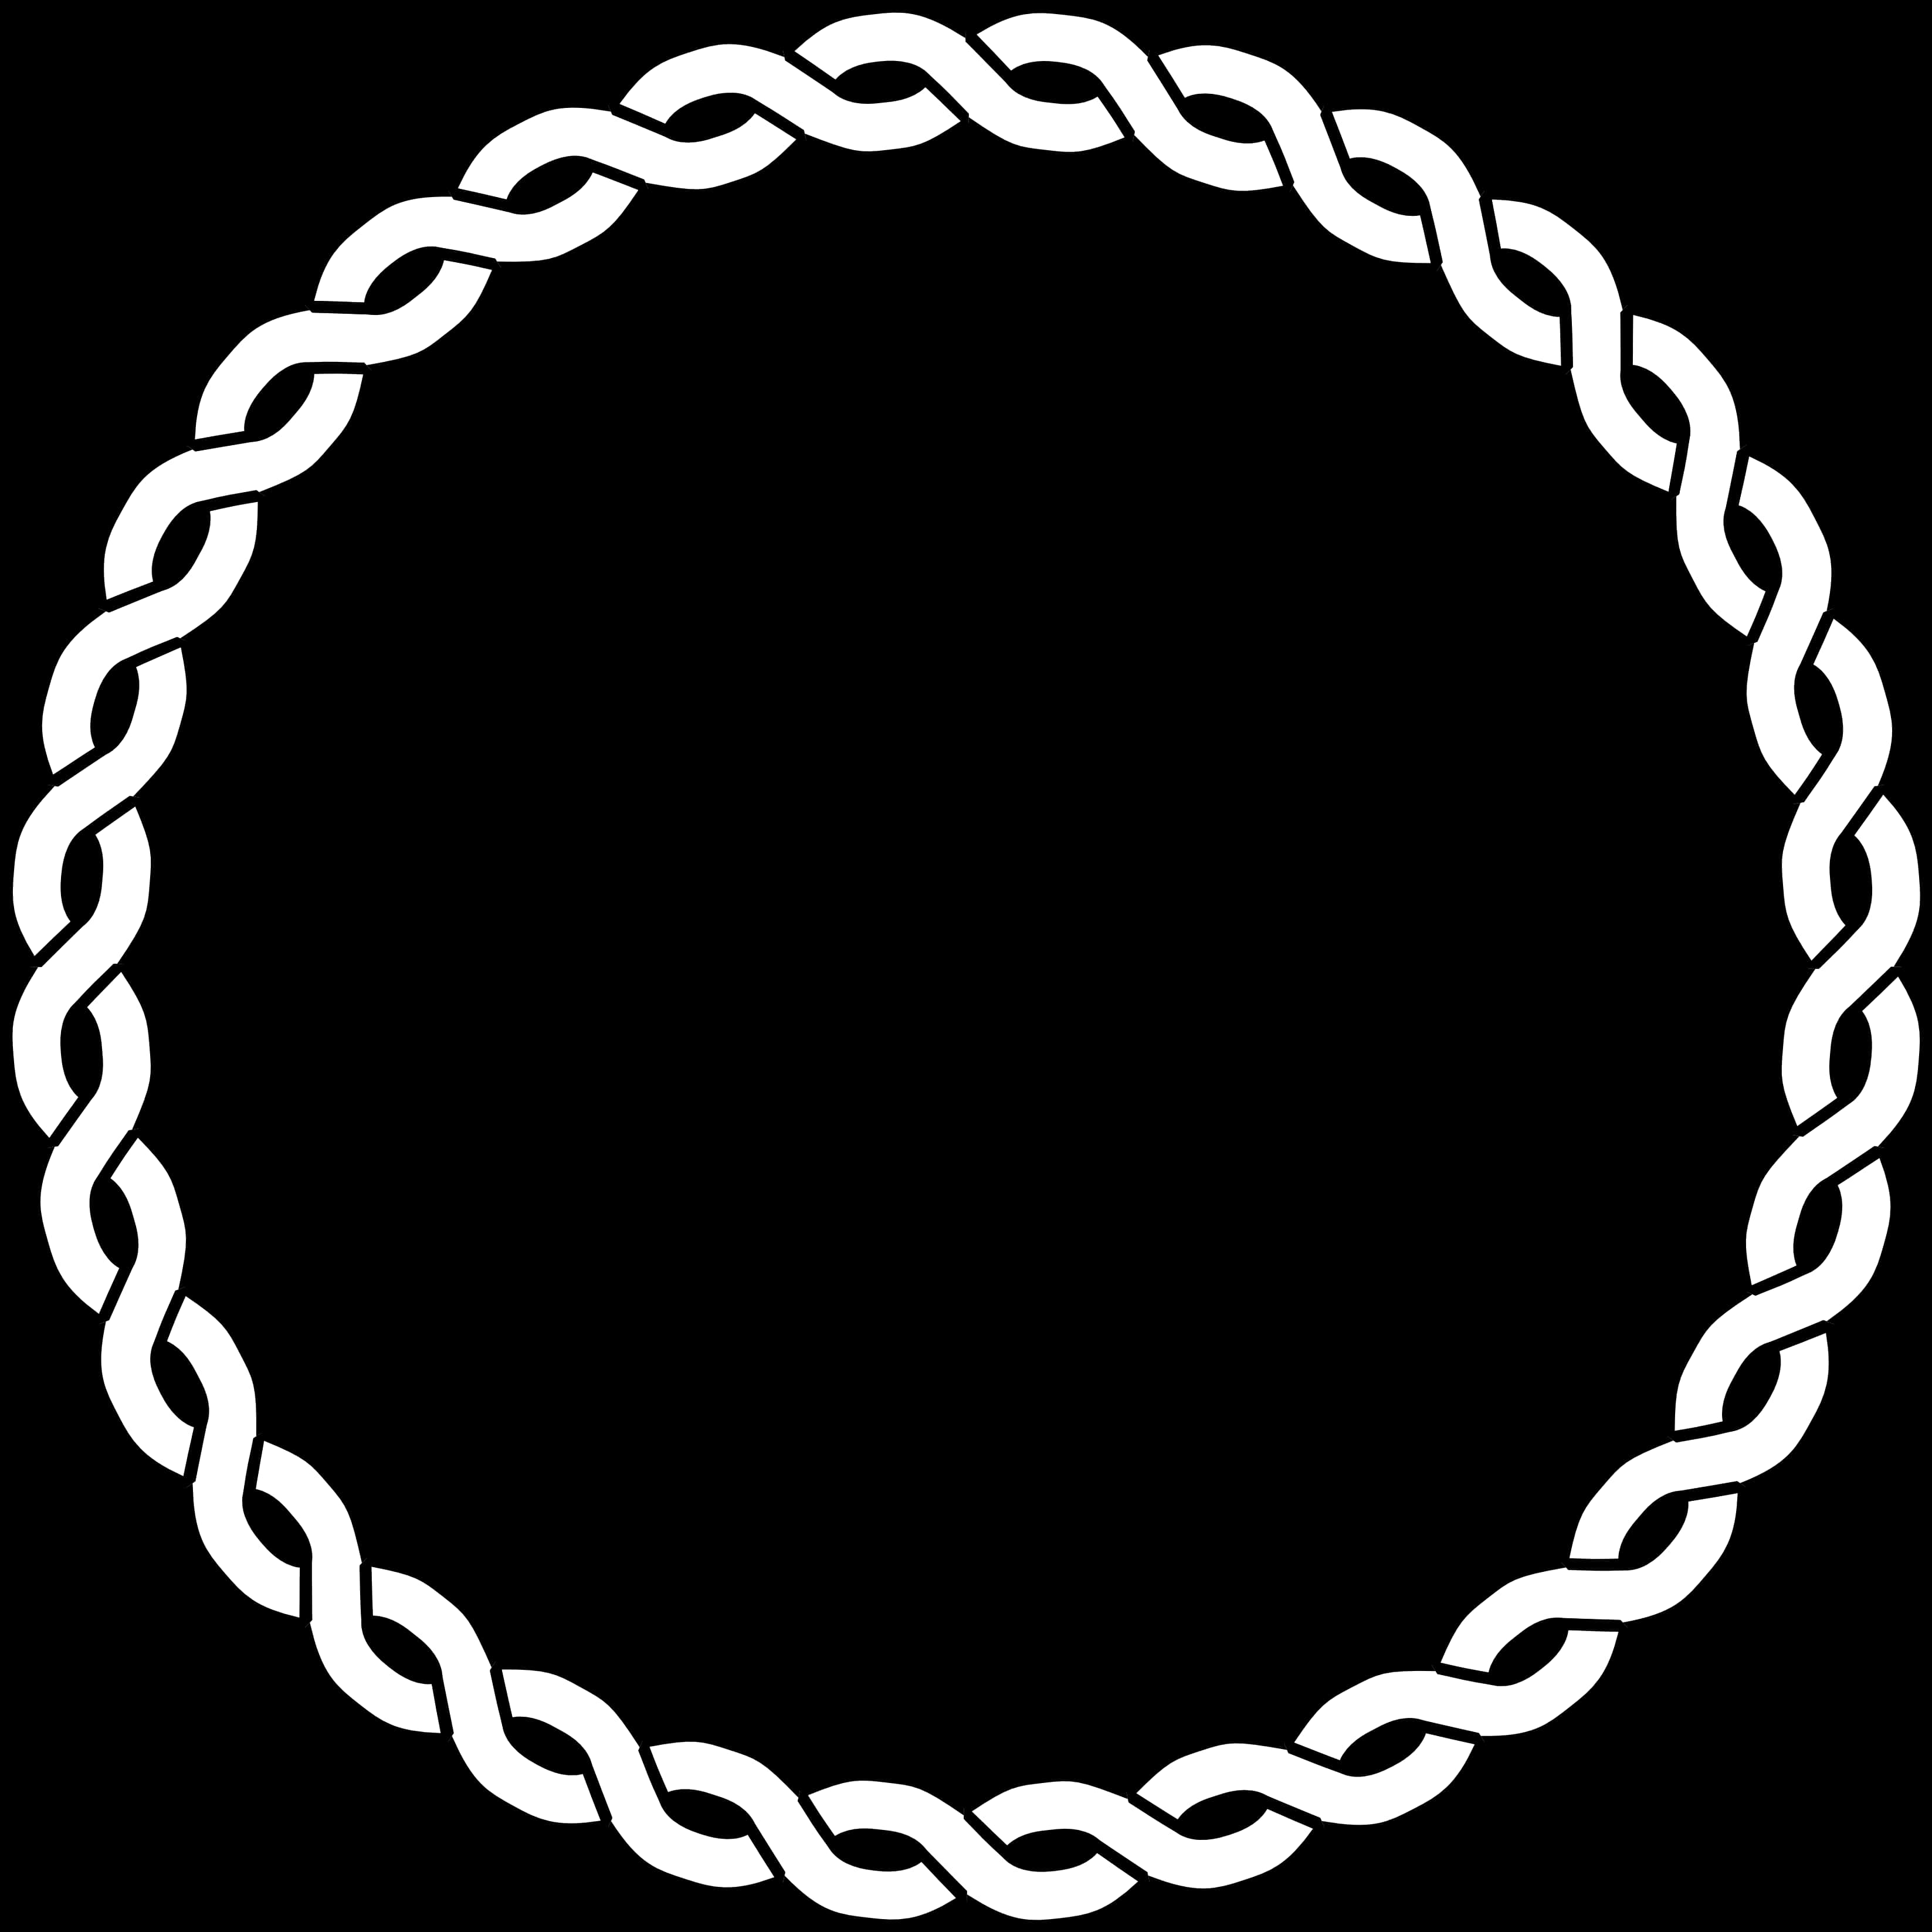 A White Circular Frame With A Black Background